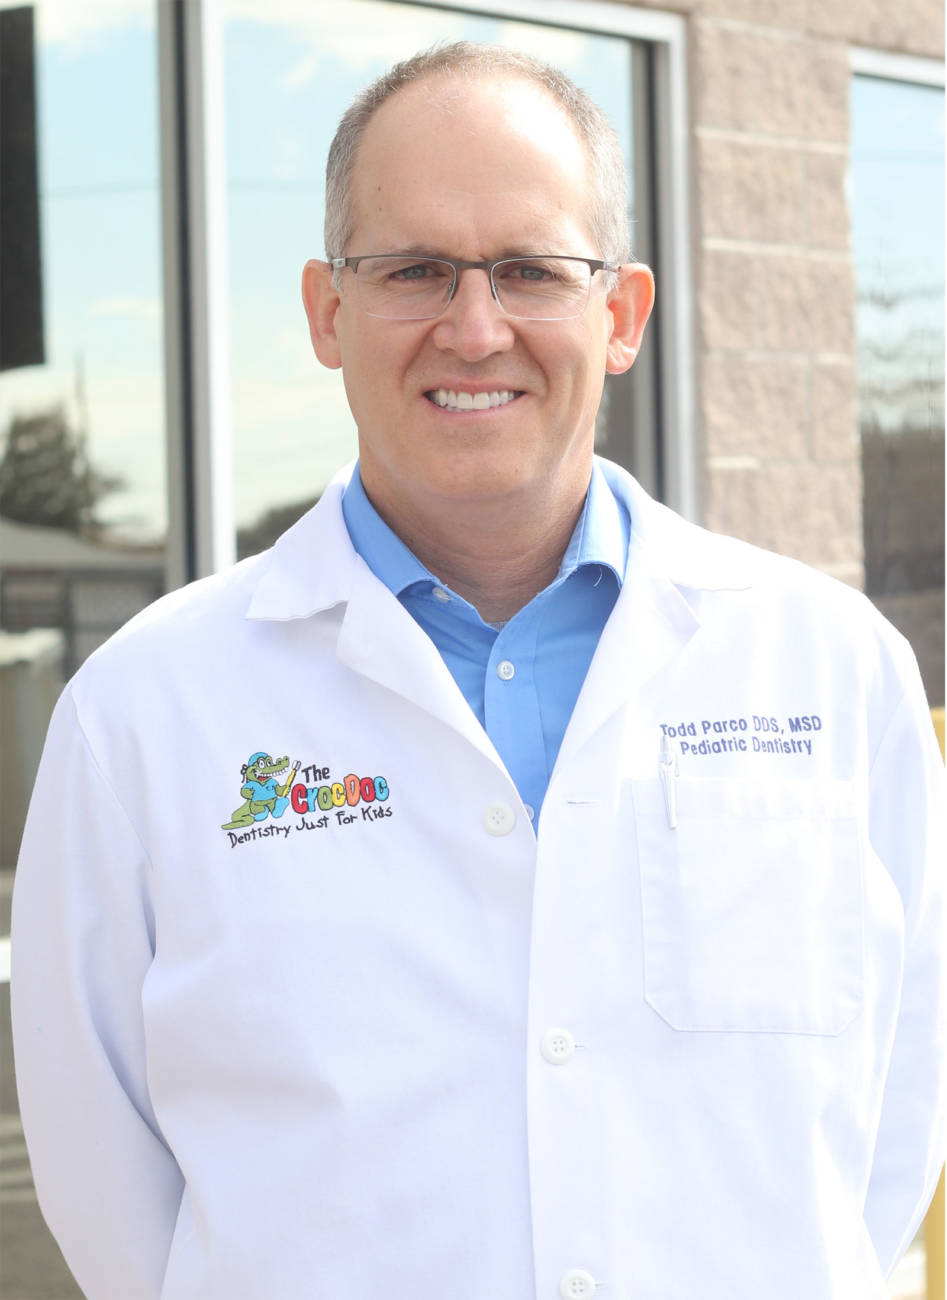 pediatric-dentist-the-crocdoc-dentistry-just-for-kids-el-paso-tx-meet-the-team-middle-todd-parco.jpg